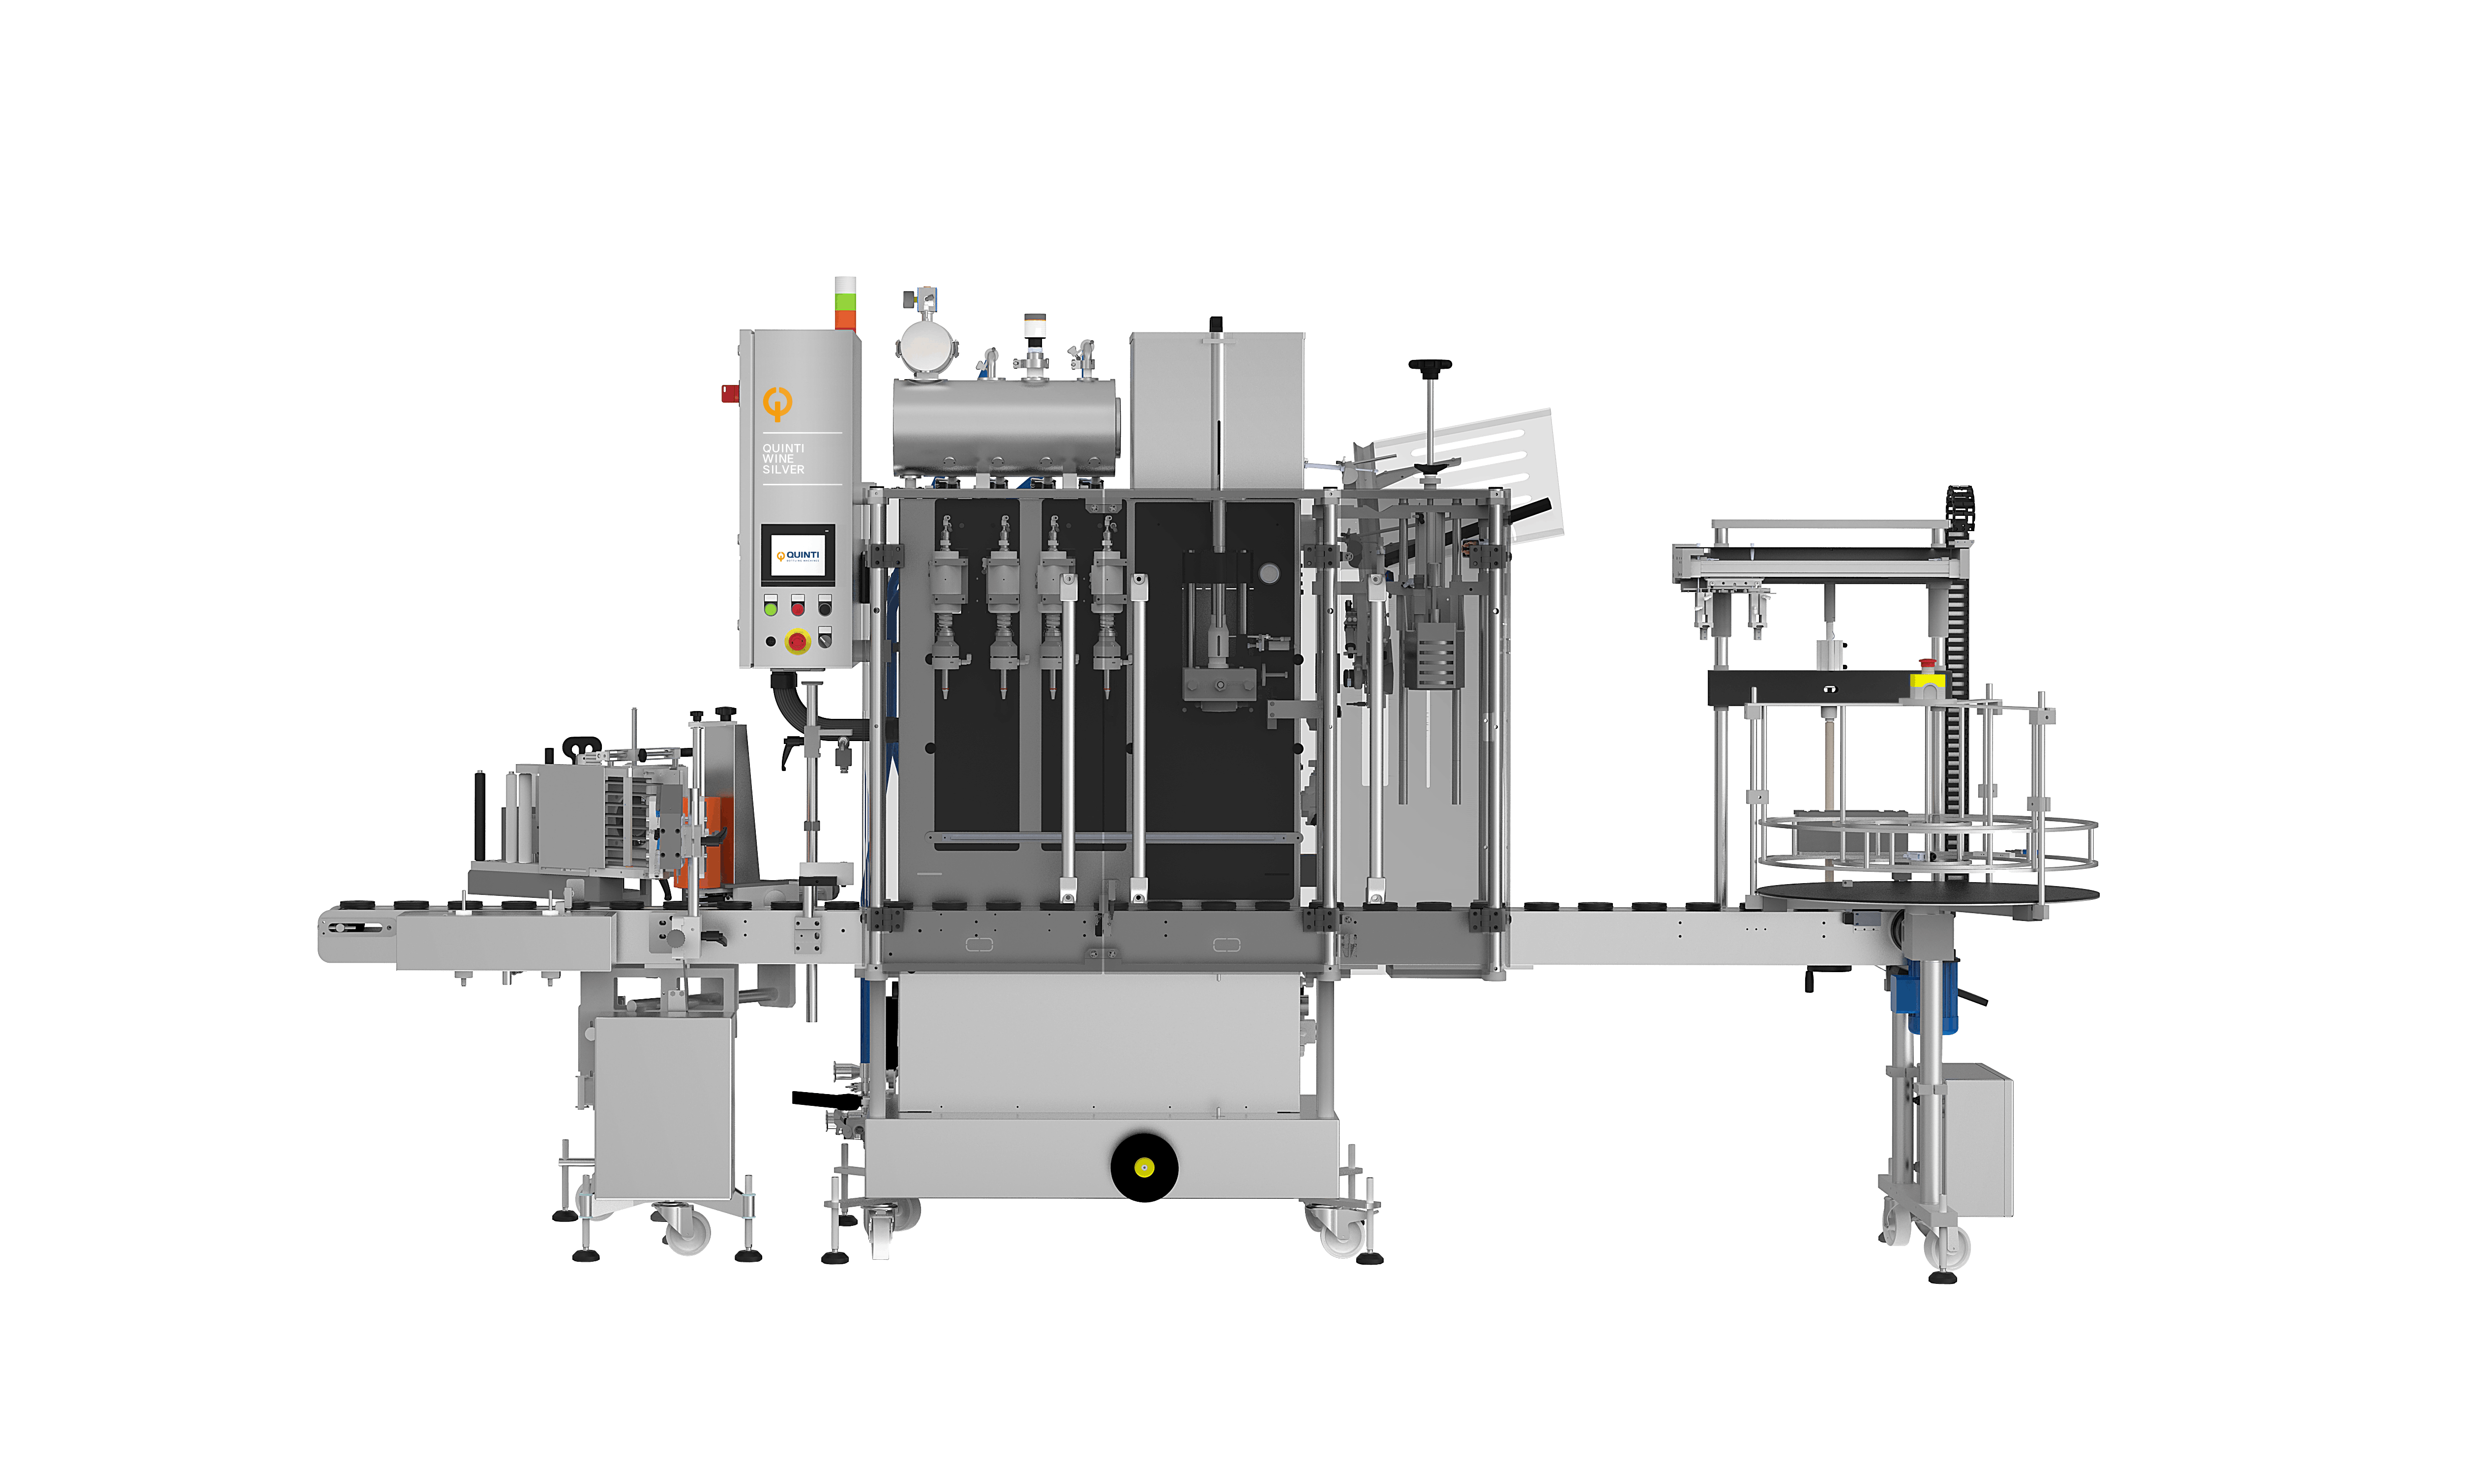 The Wine Silver machinery, seen from the front, from left to right it is possible to see the manual rinser, the labeling station, the touch screen panel to operate the machine, filling nozzles, capper, encapsulator, unloading surface for bottle accumulation.